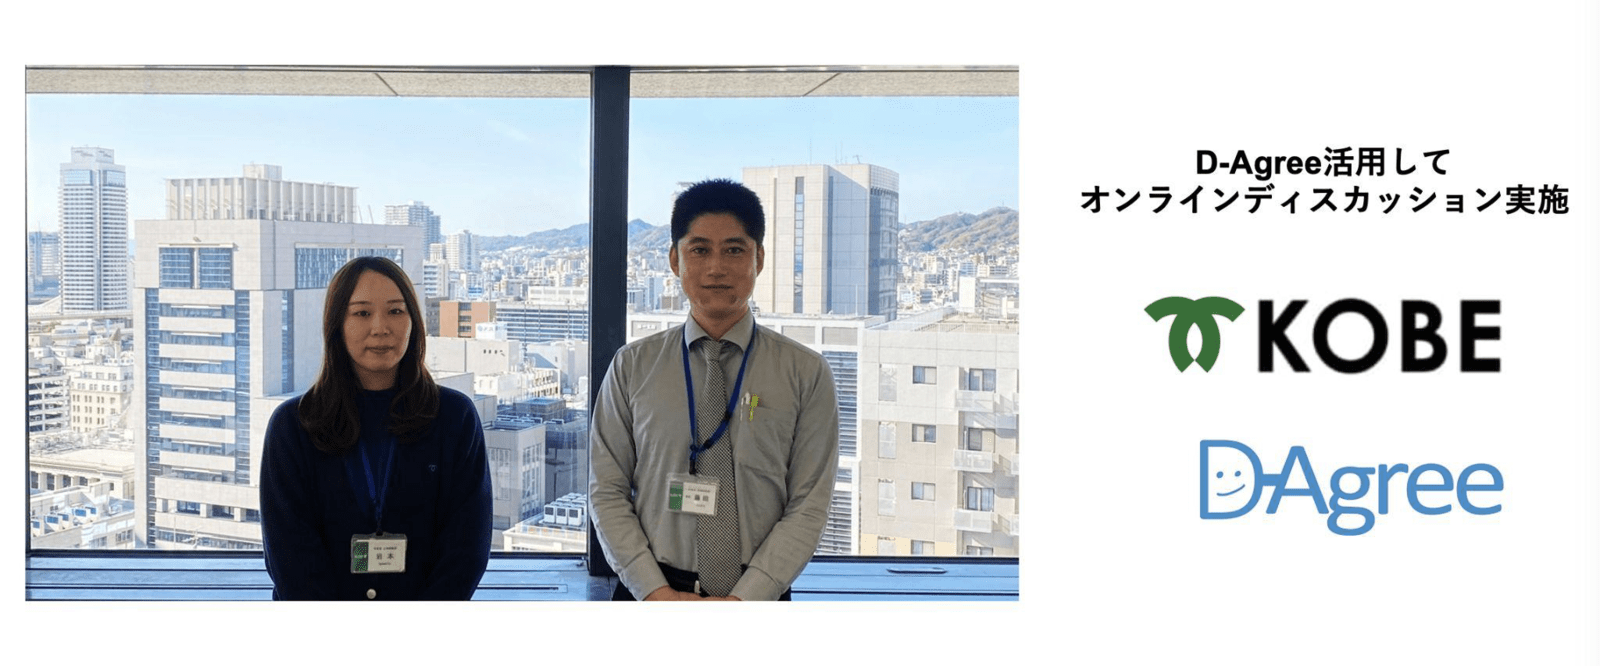 Conducted online discussions and demonstration experiments in Kobe City, Hyogo Prefecture.Aggregate and analyze various opinions online on the theme of park maintenance